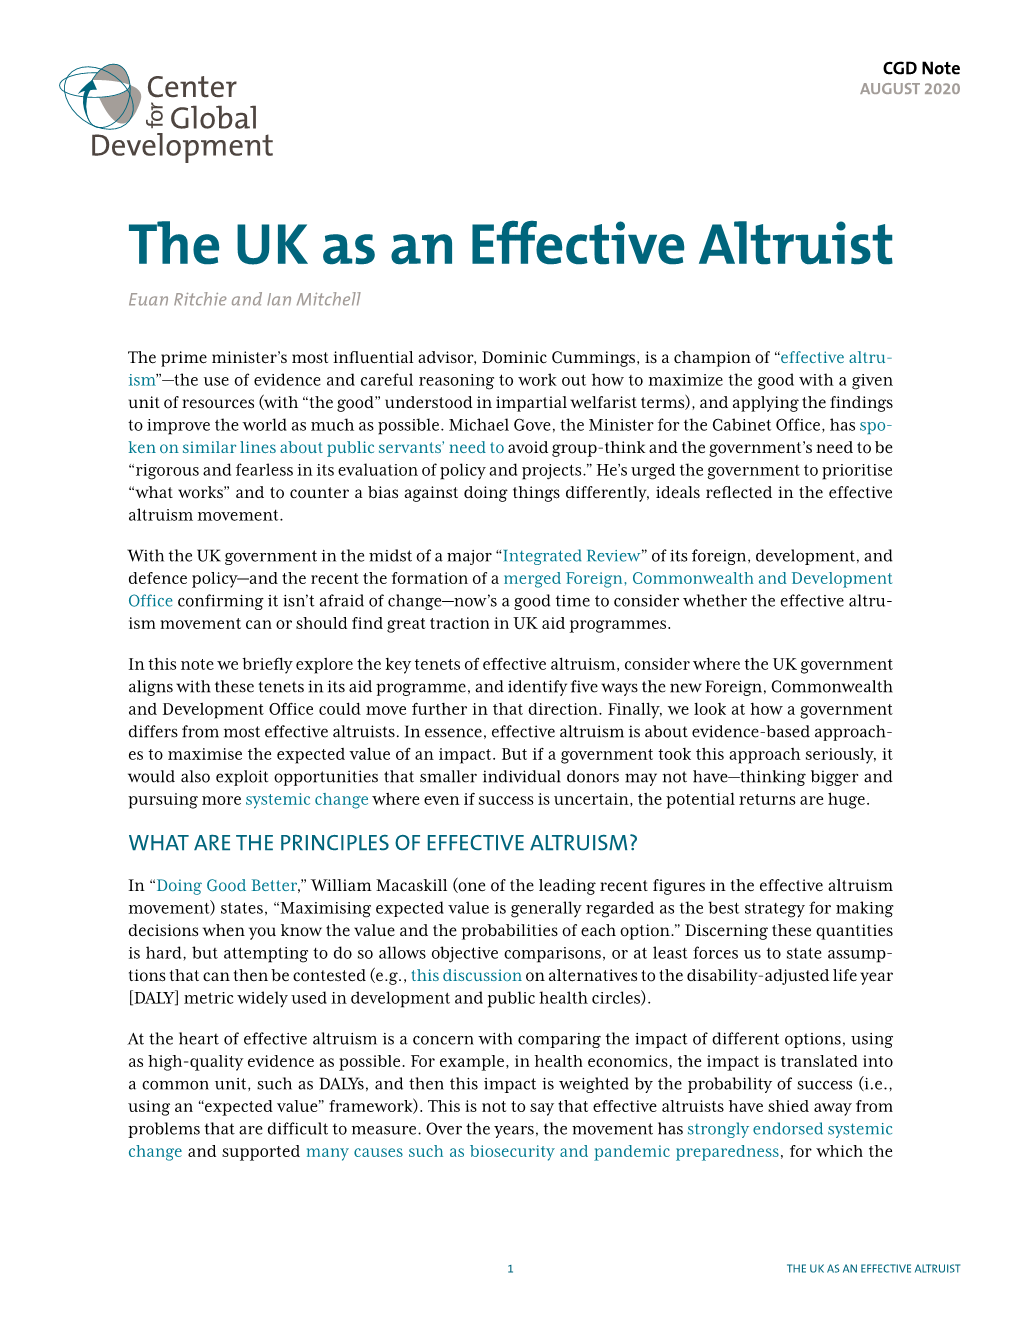 The UK As an Effective Altruist Euan Ritchie and Ian Mitchell